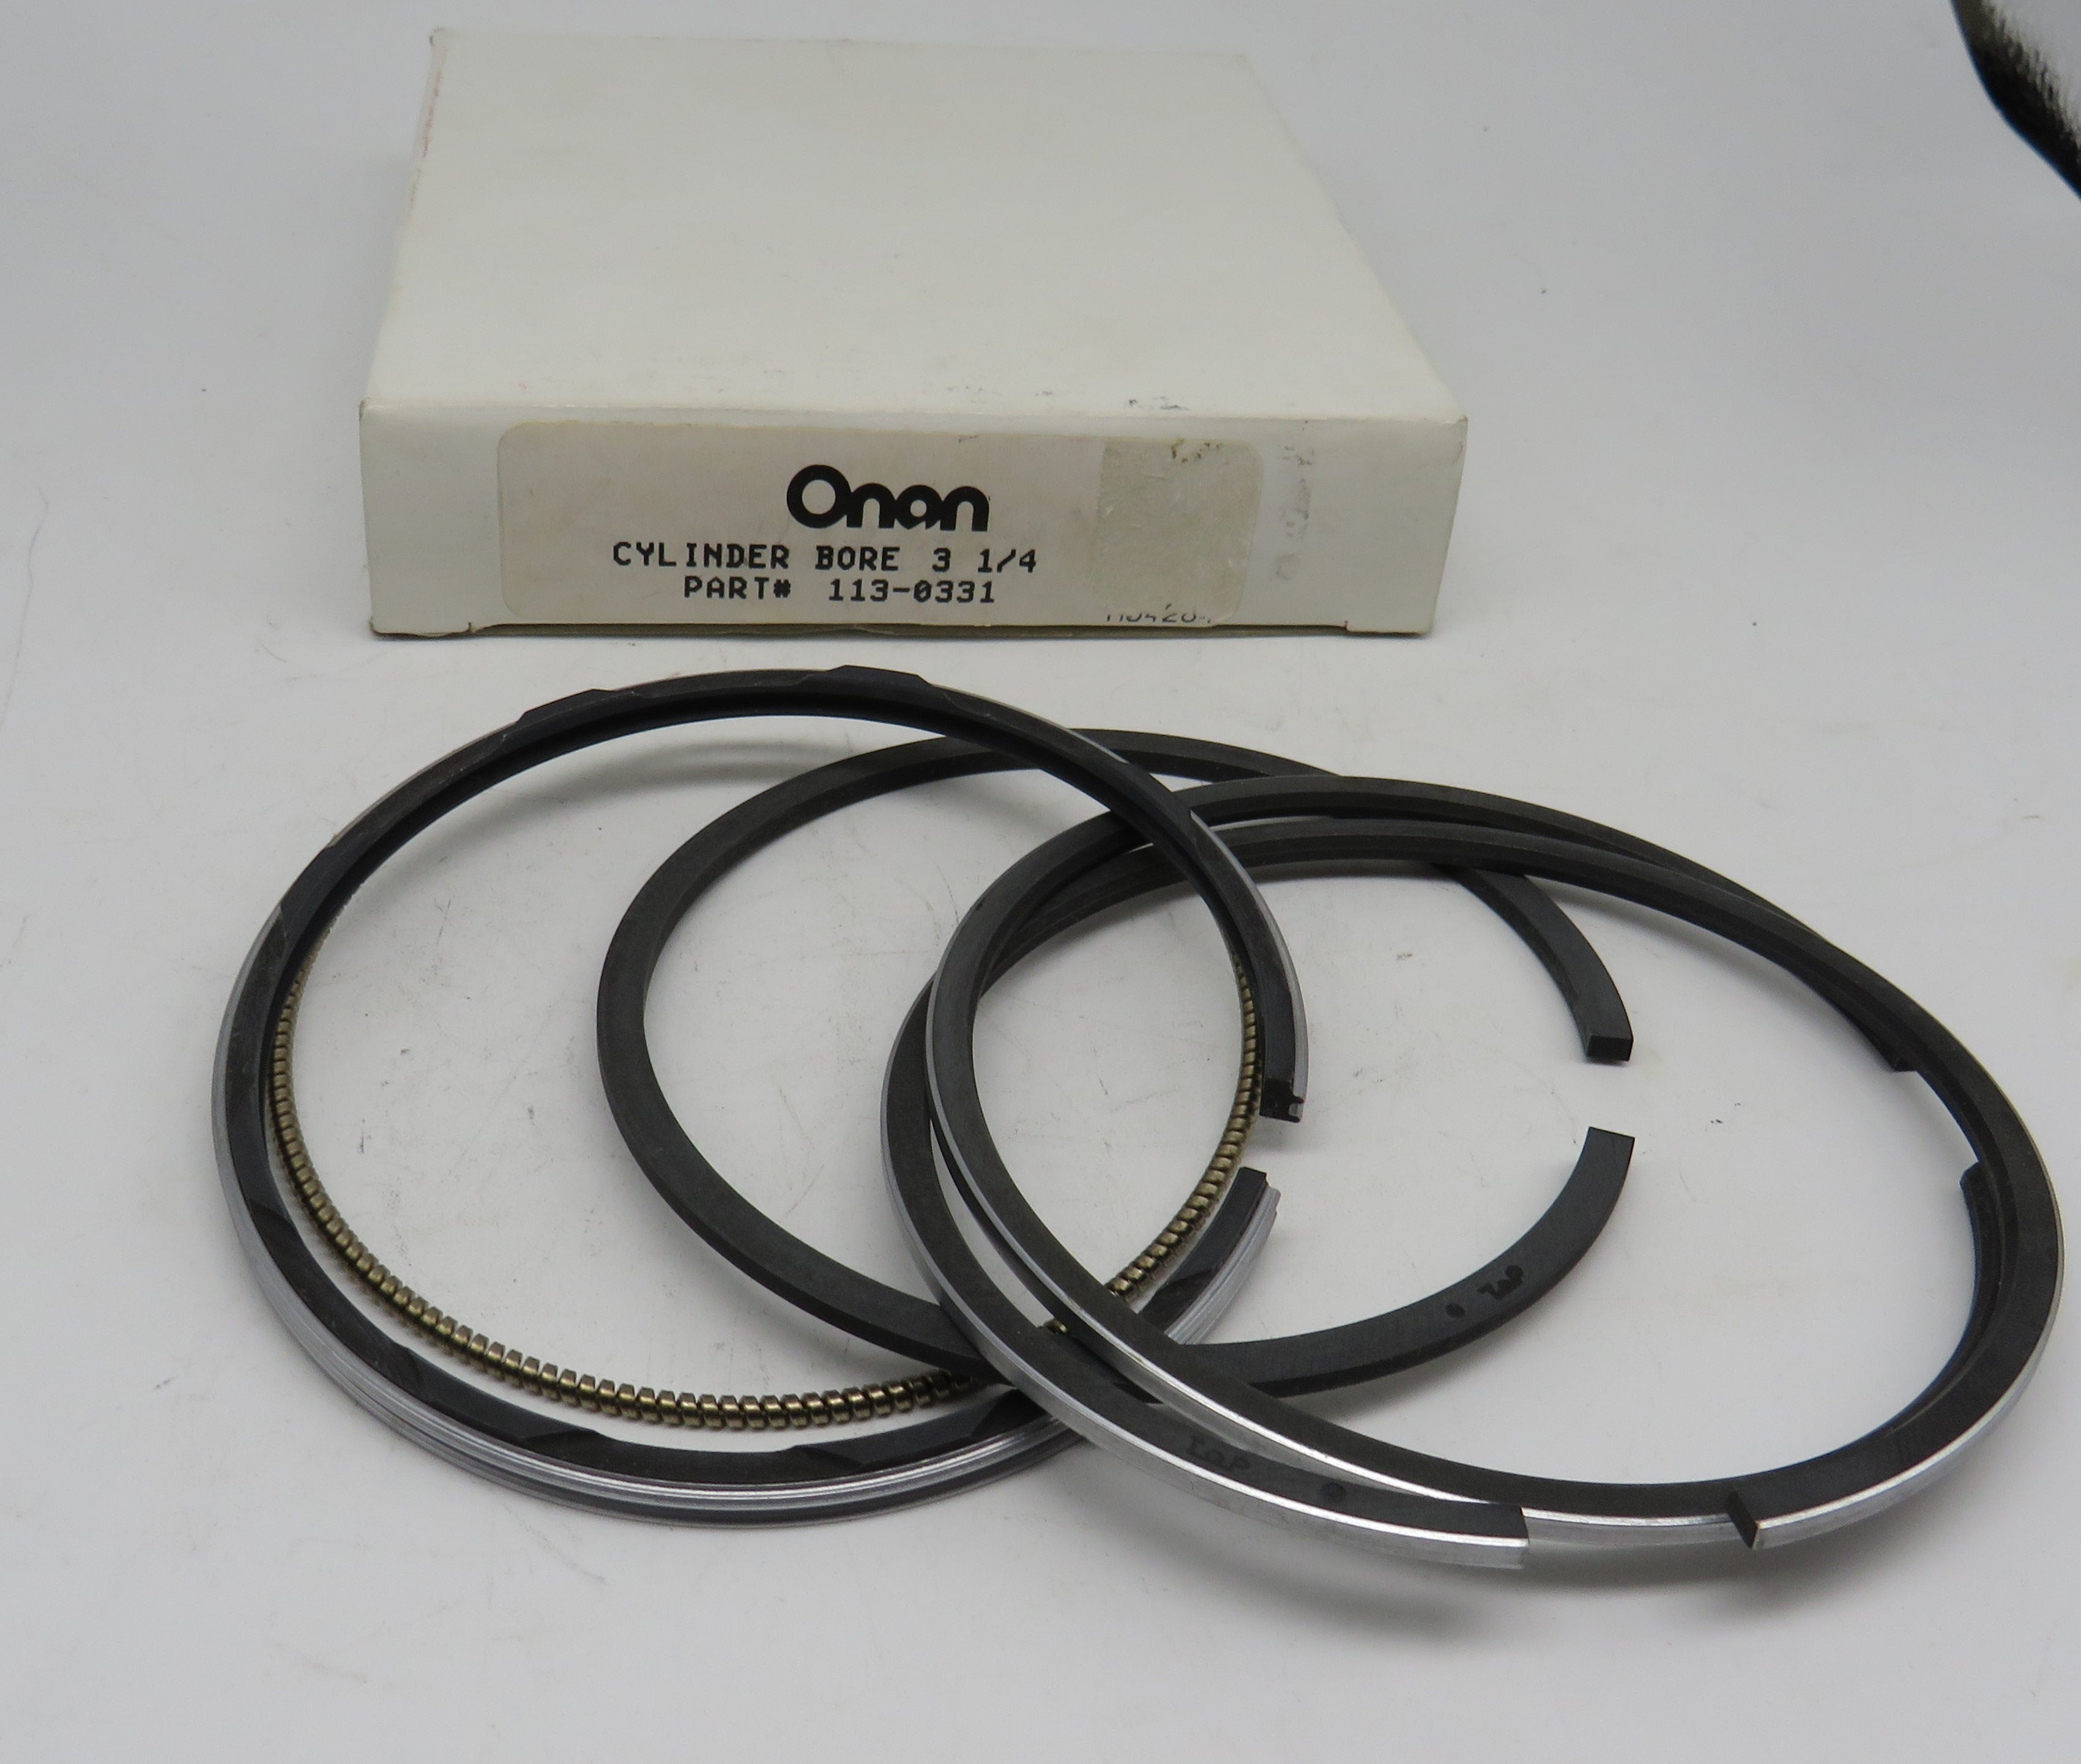 113-0130 Onan Piston Ring Set OBSOLETE (Replaced to new #113-0331) for MDJB Series 